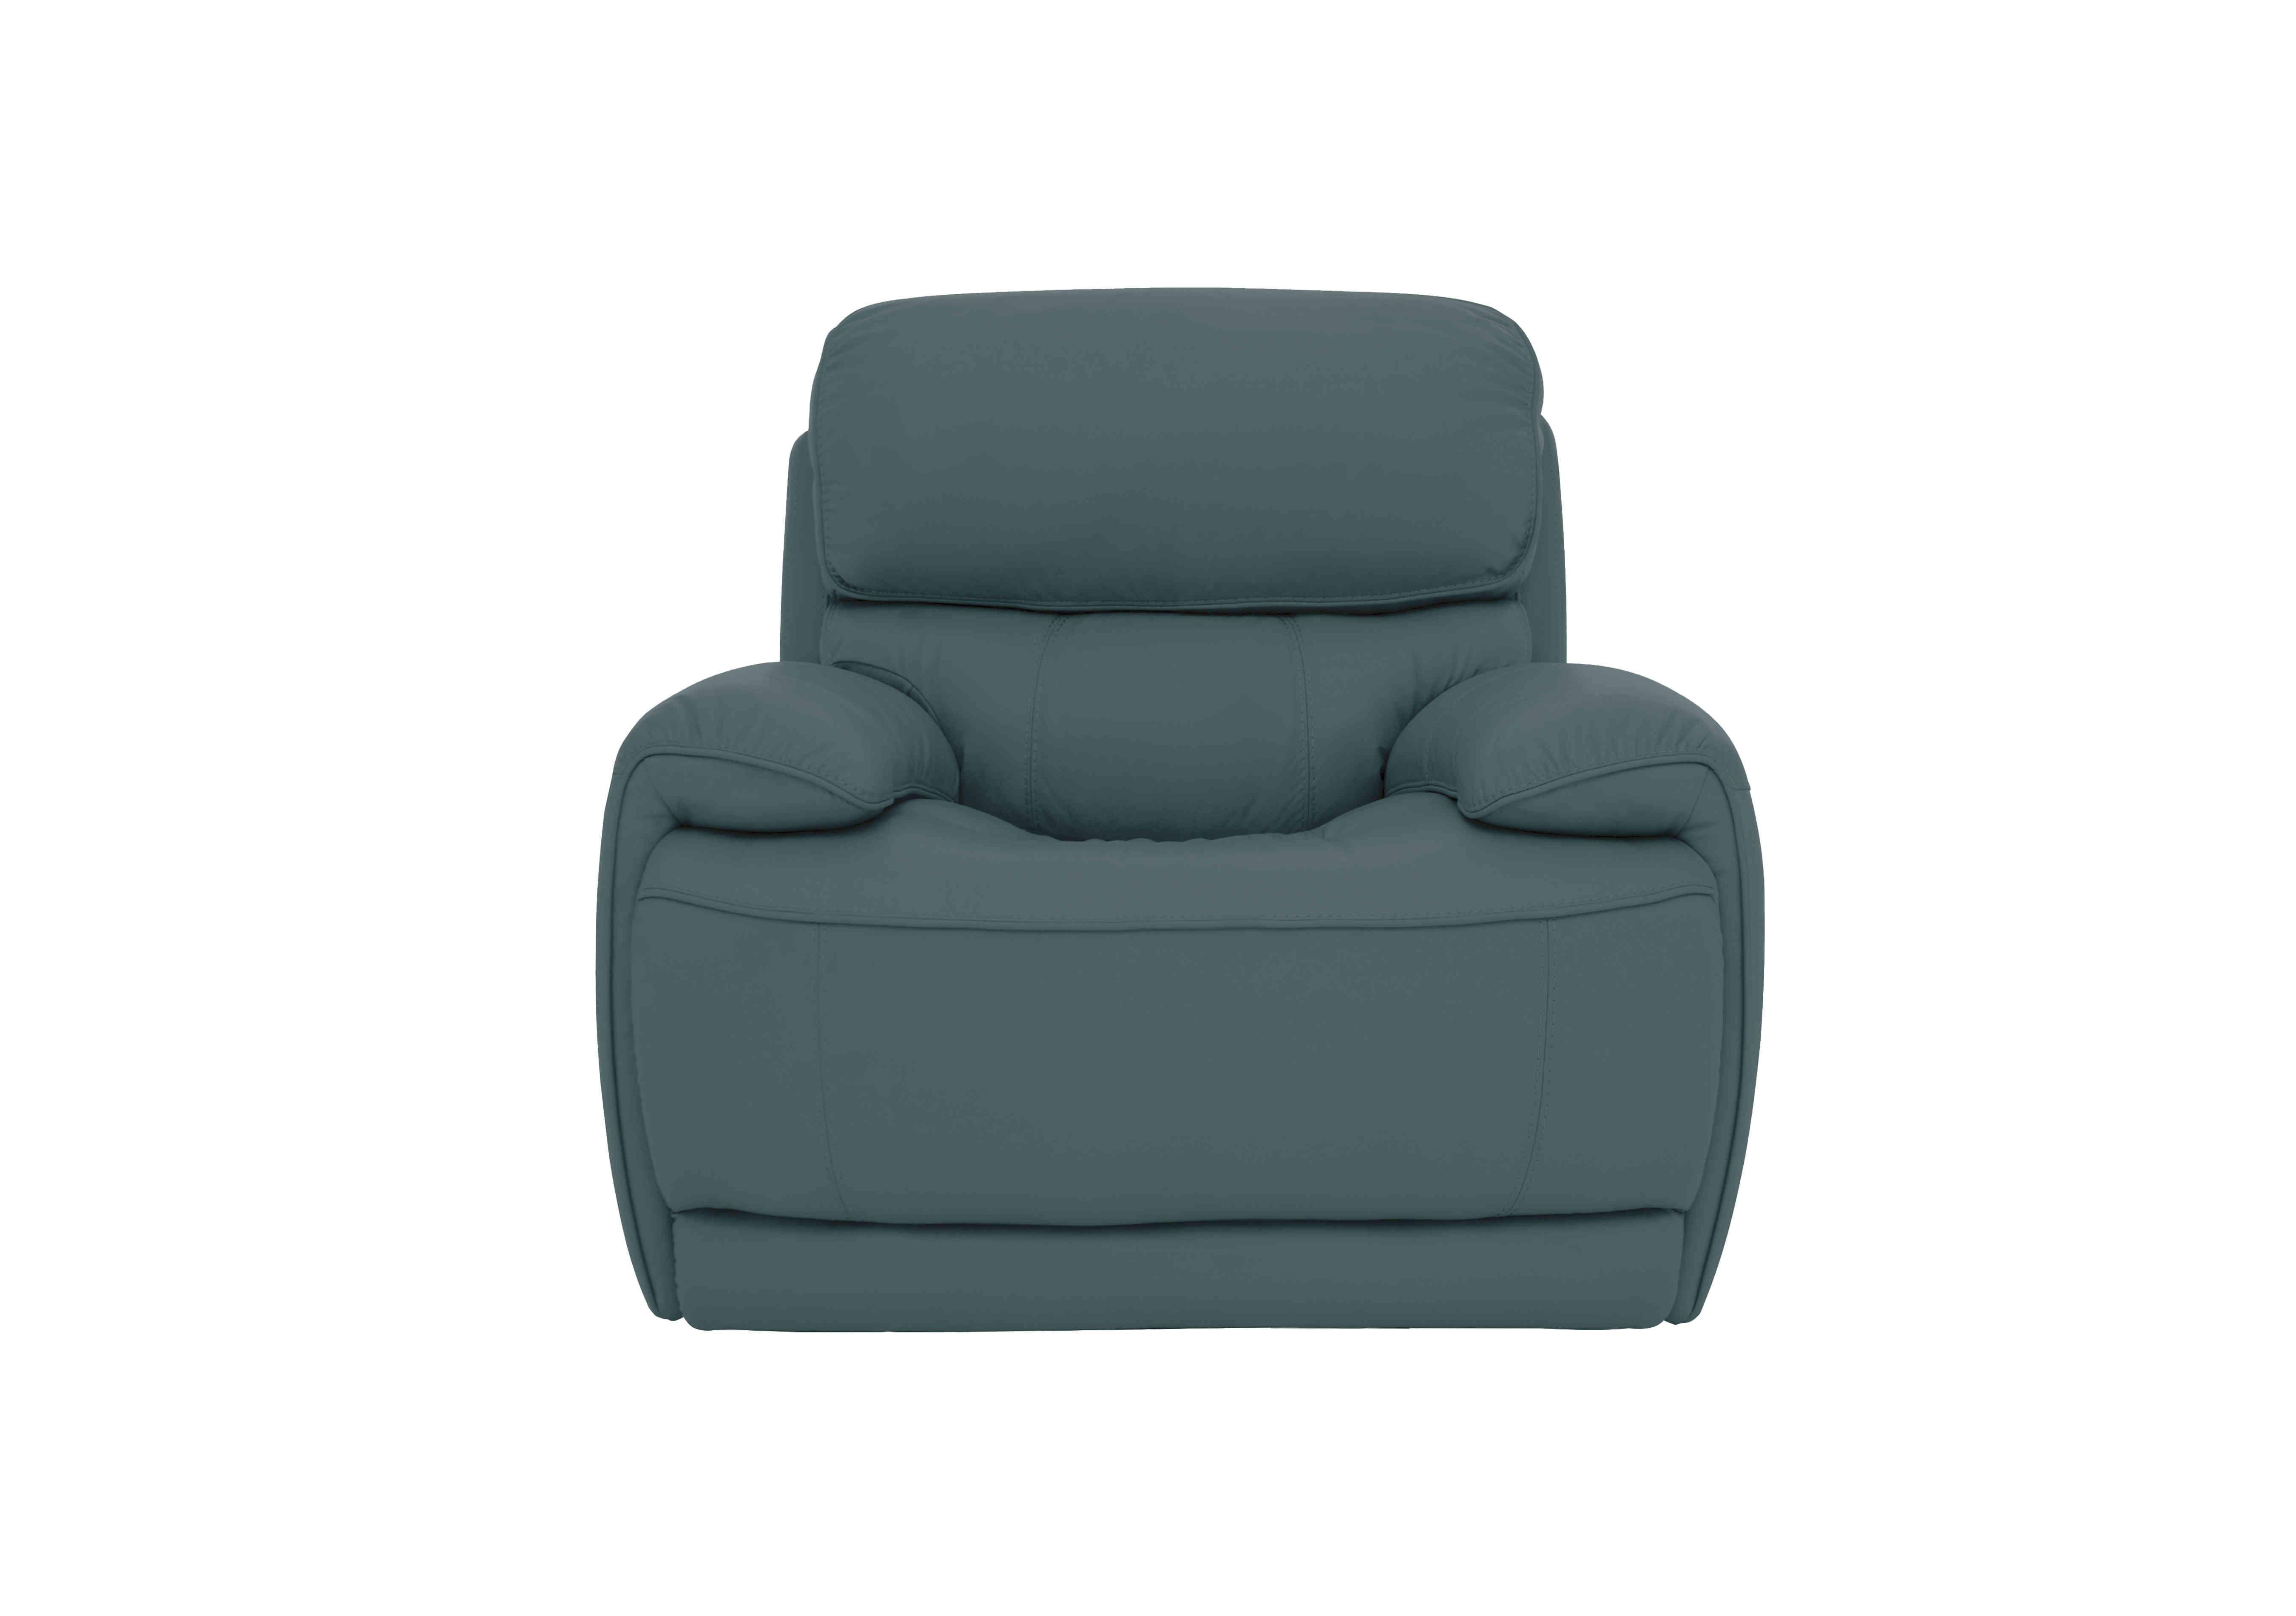 Rocco Leather Power Rocker Armchair with Power Headrests in Bv-301e Lake Green on Furniture Village